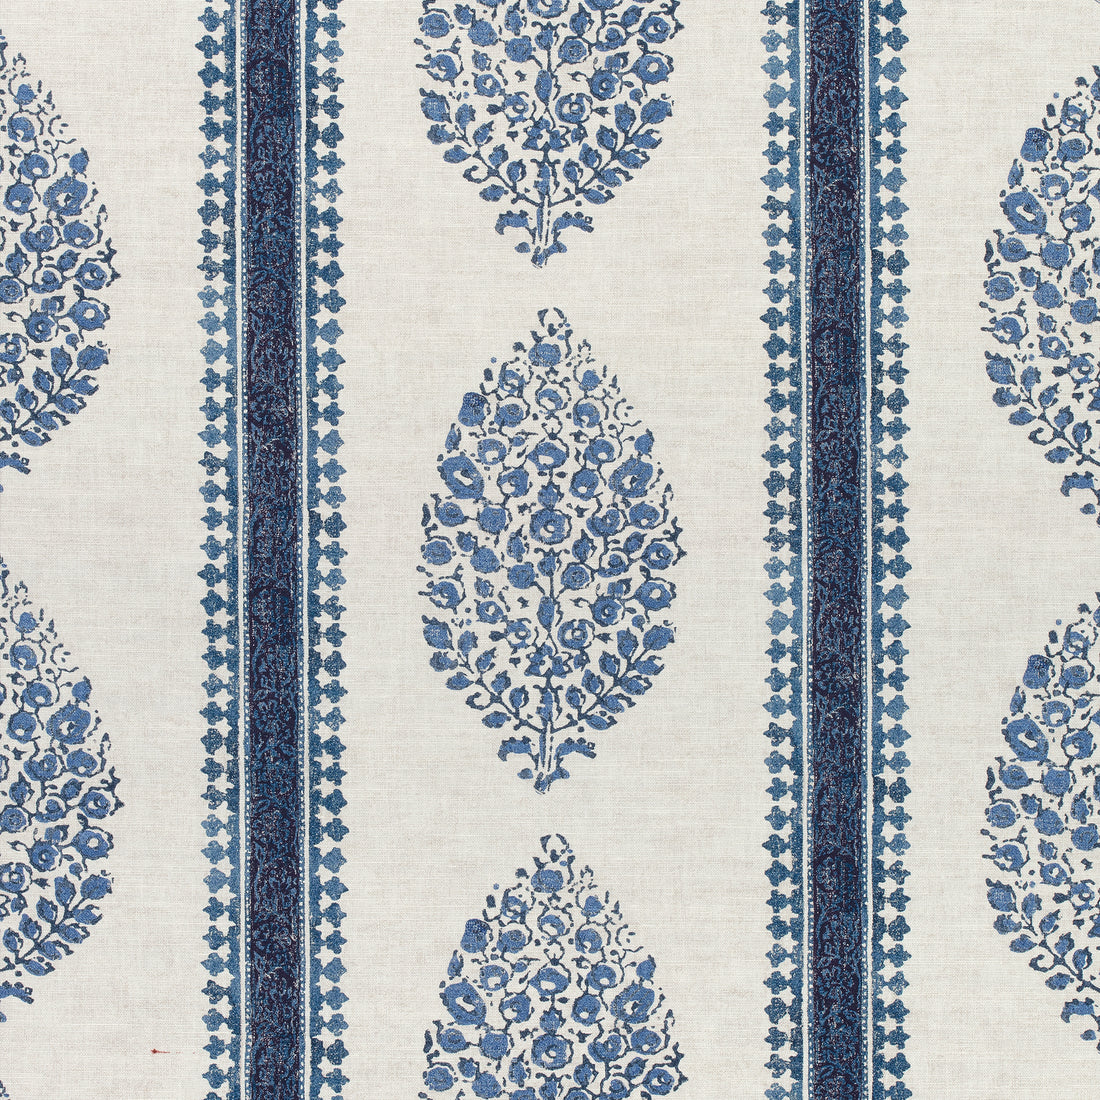 Chappana fabric in blue and white color - pattern number F910239 - by Thibaut in the Colony collection